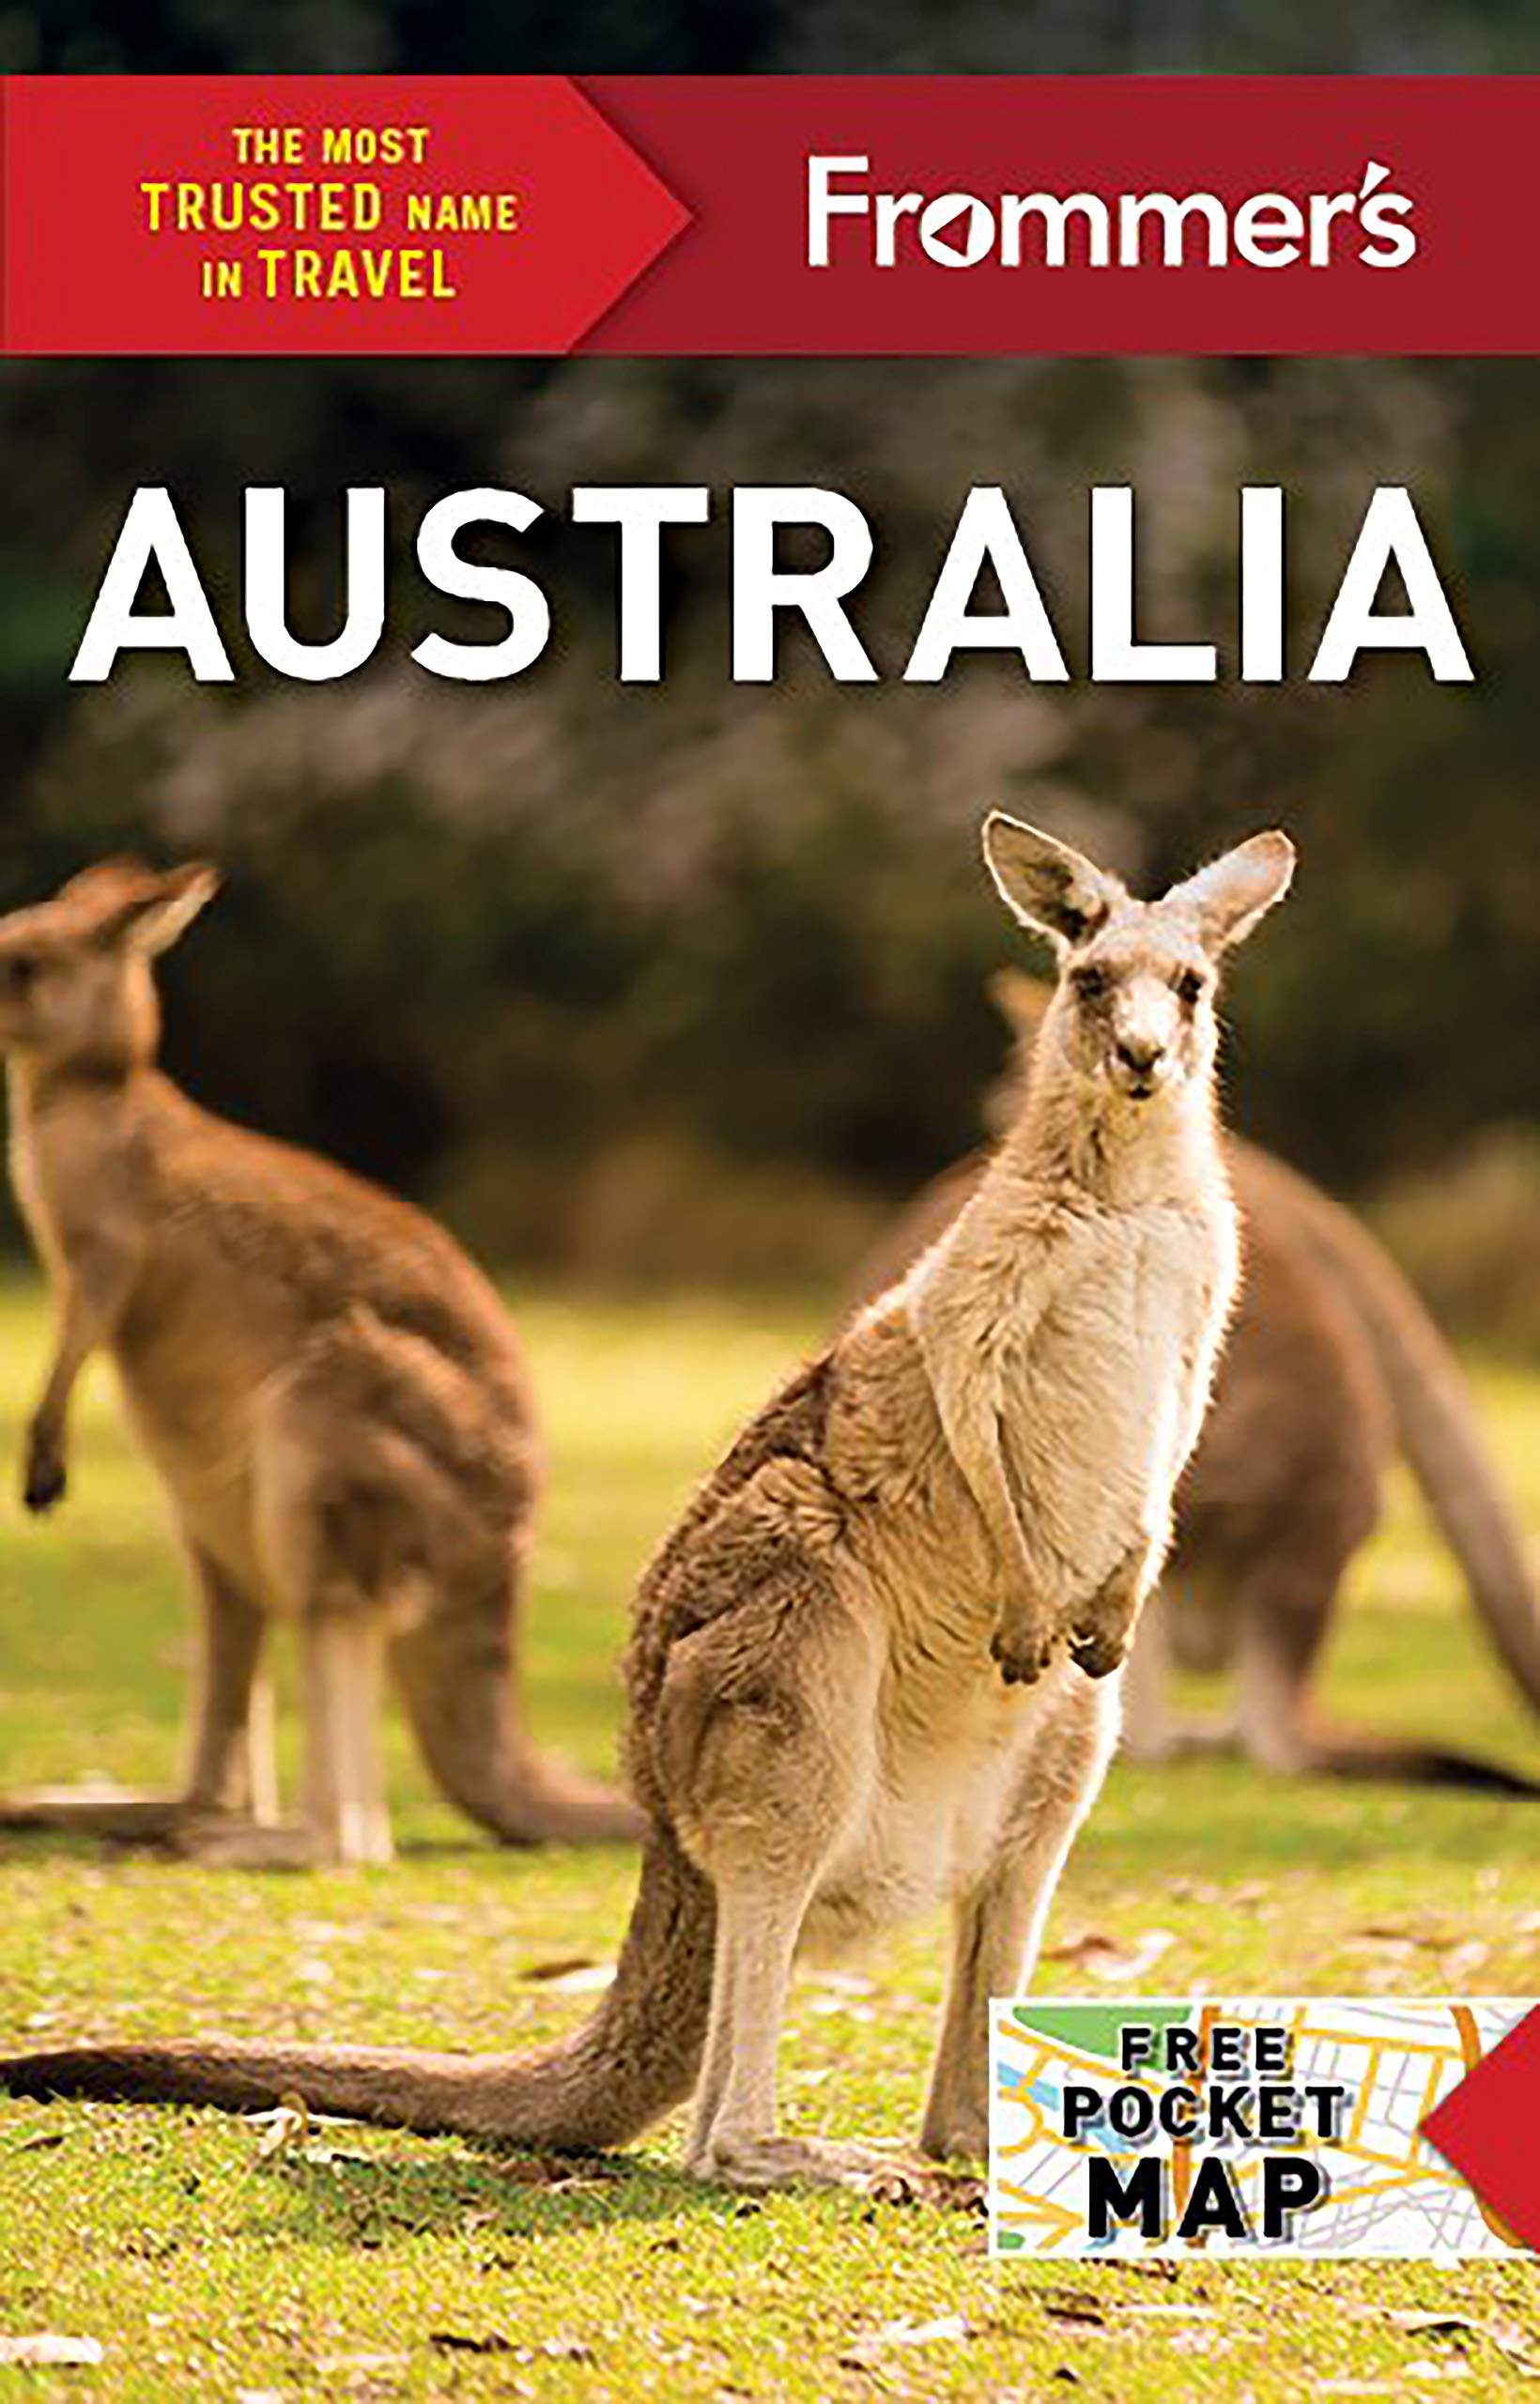 Frommer's Australia (Complete Guides)